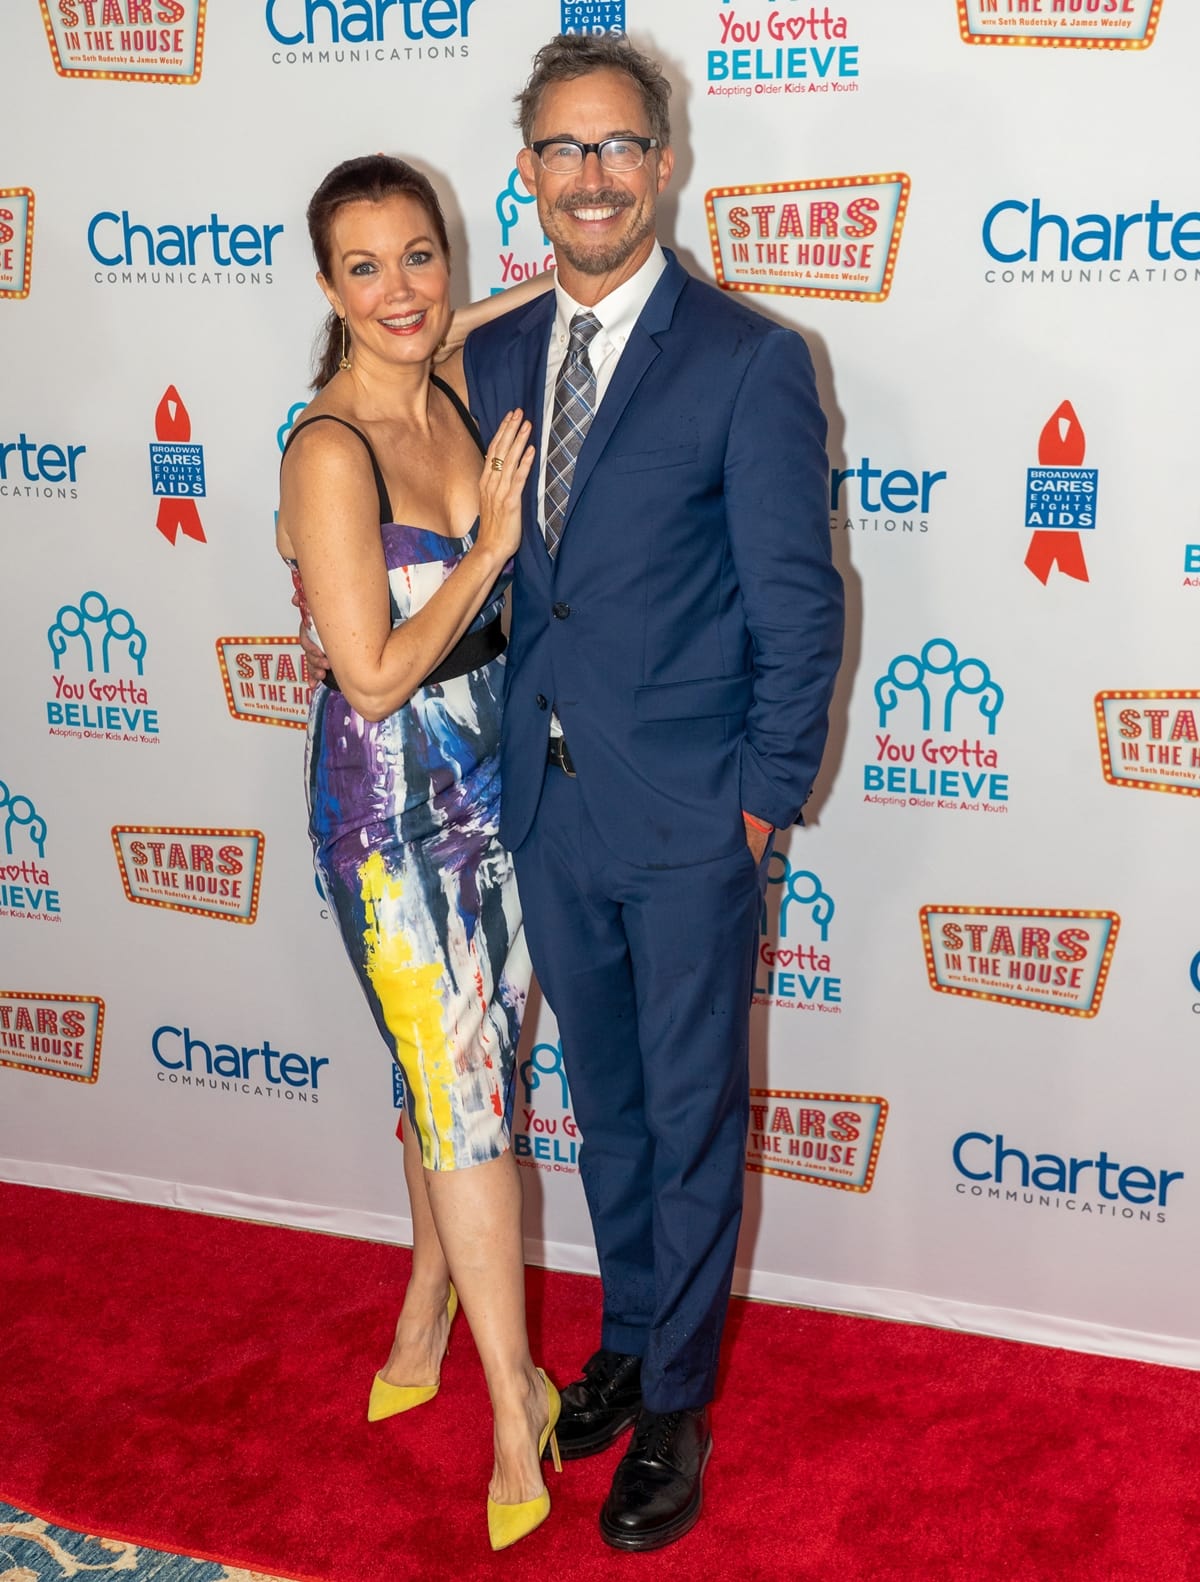 At the 9th Annual "Voices: Stars For Foster Kids" Benefit Concert in New York City on September 18, 2023, Bellamy Young measured 5 feet 7 inches (170.2 cm) in height, while Tom Cavanagh stood at 6 feet (182.9 cm)